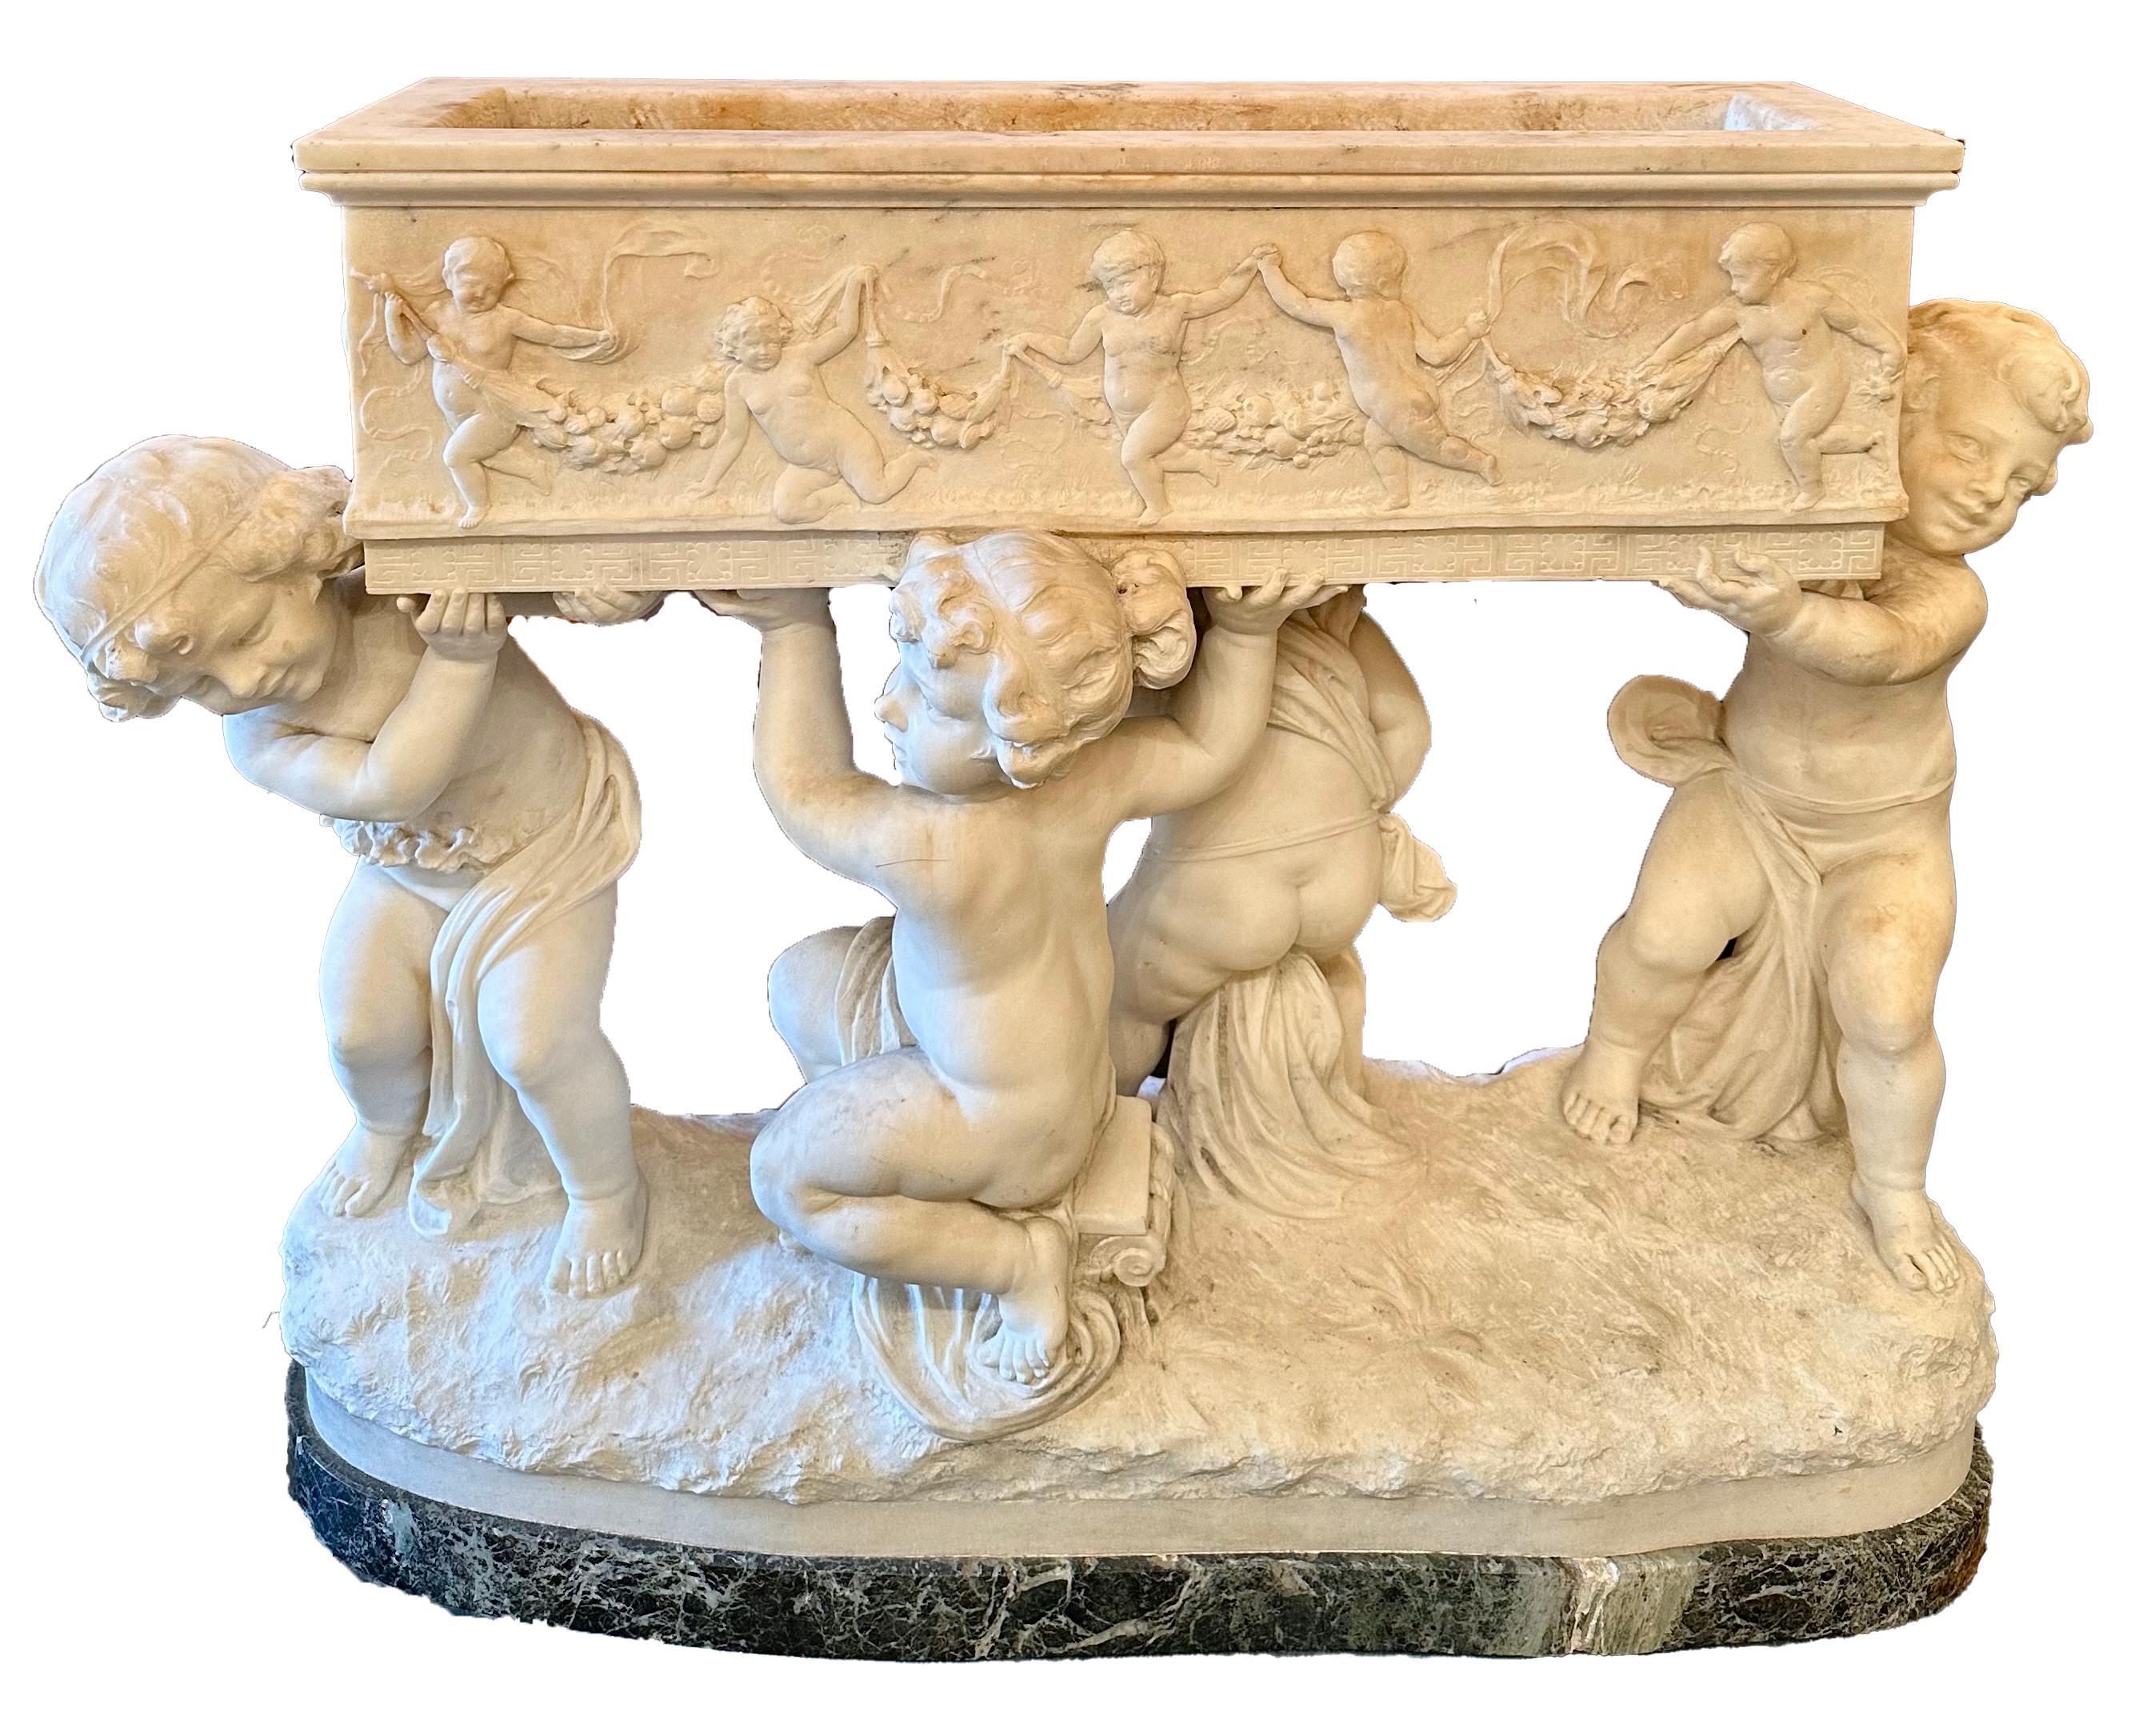 Grand Size Antique French Belle Époque Carrara Marble Jardiniere Circa 1890-1900 In Good Condition For Sale In New Orleans, LA